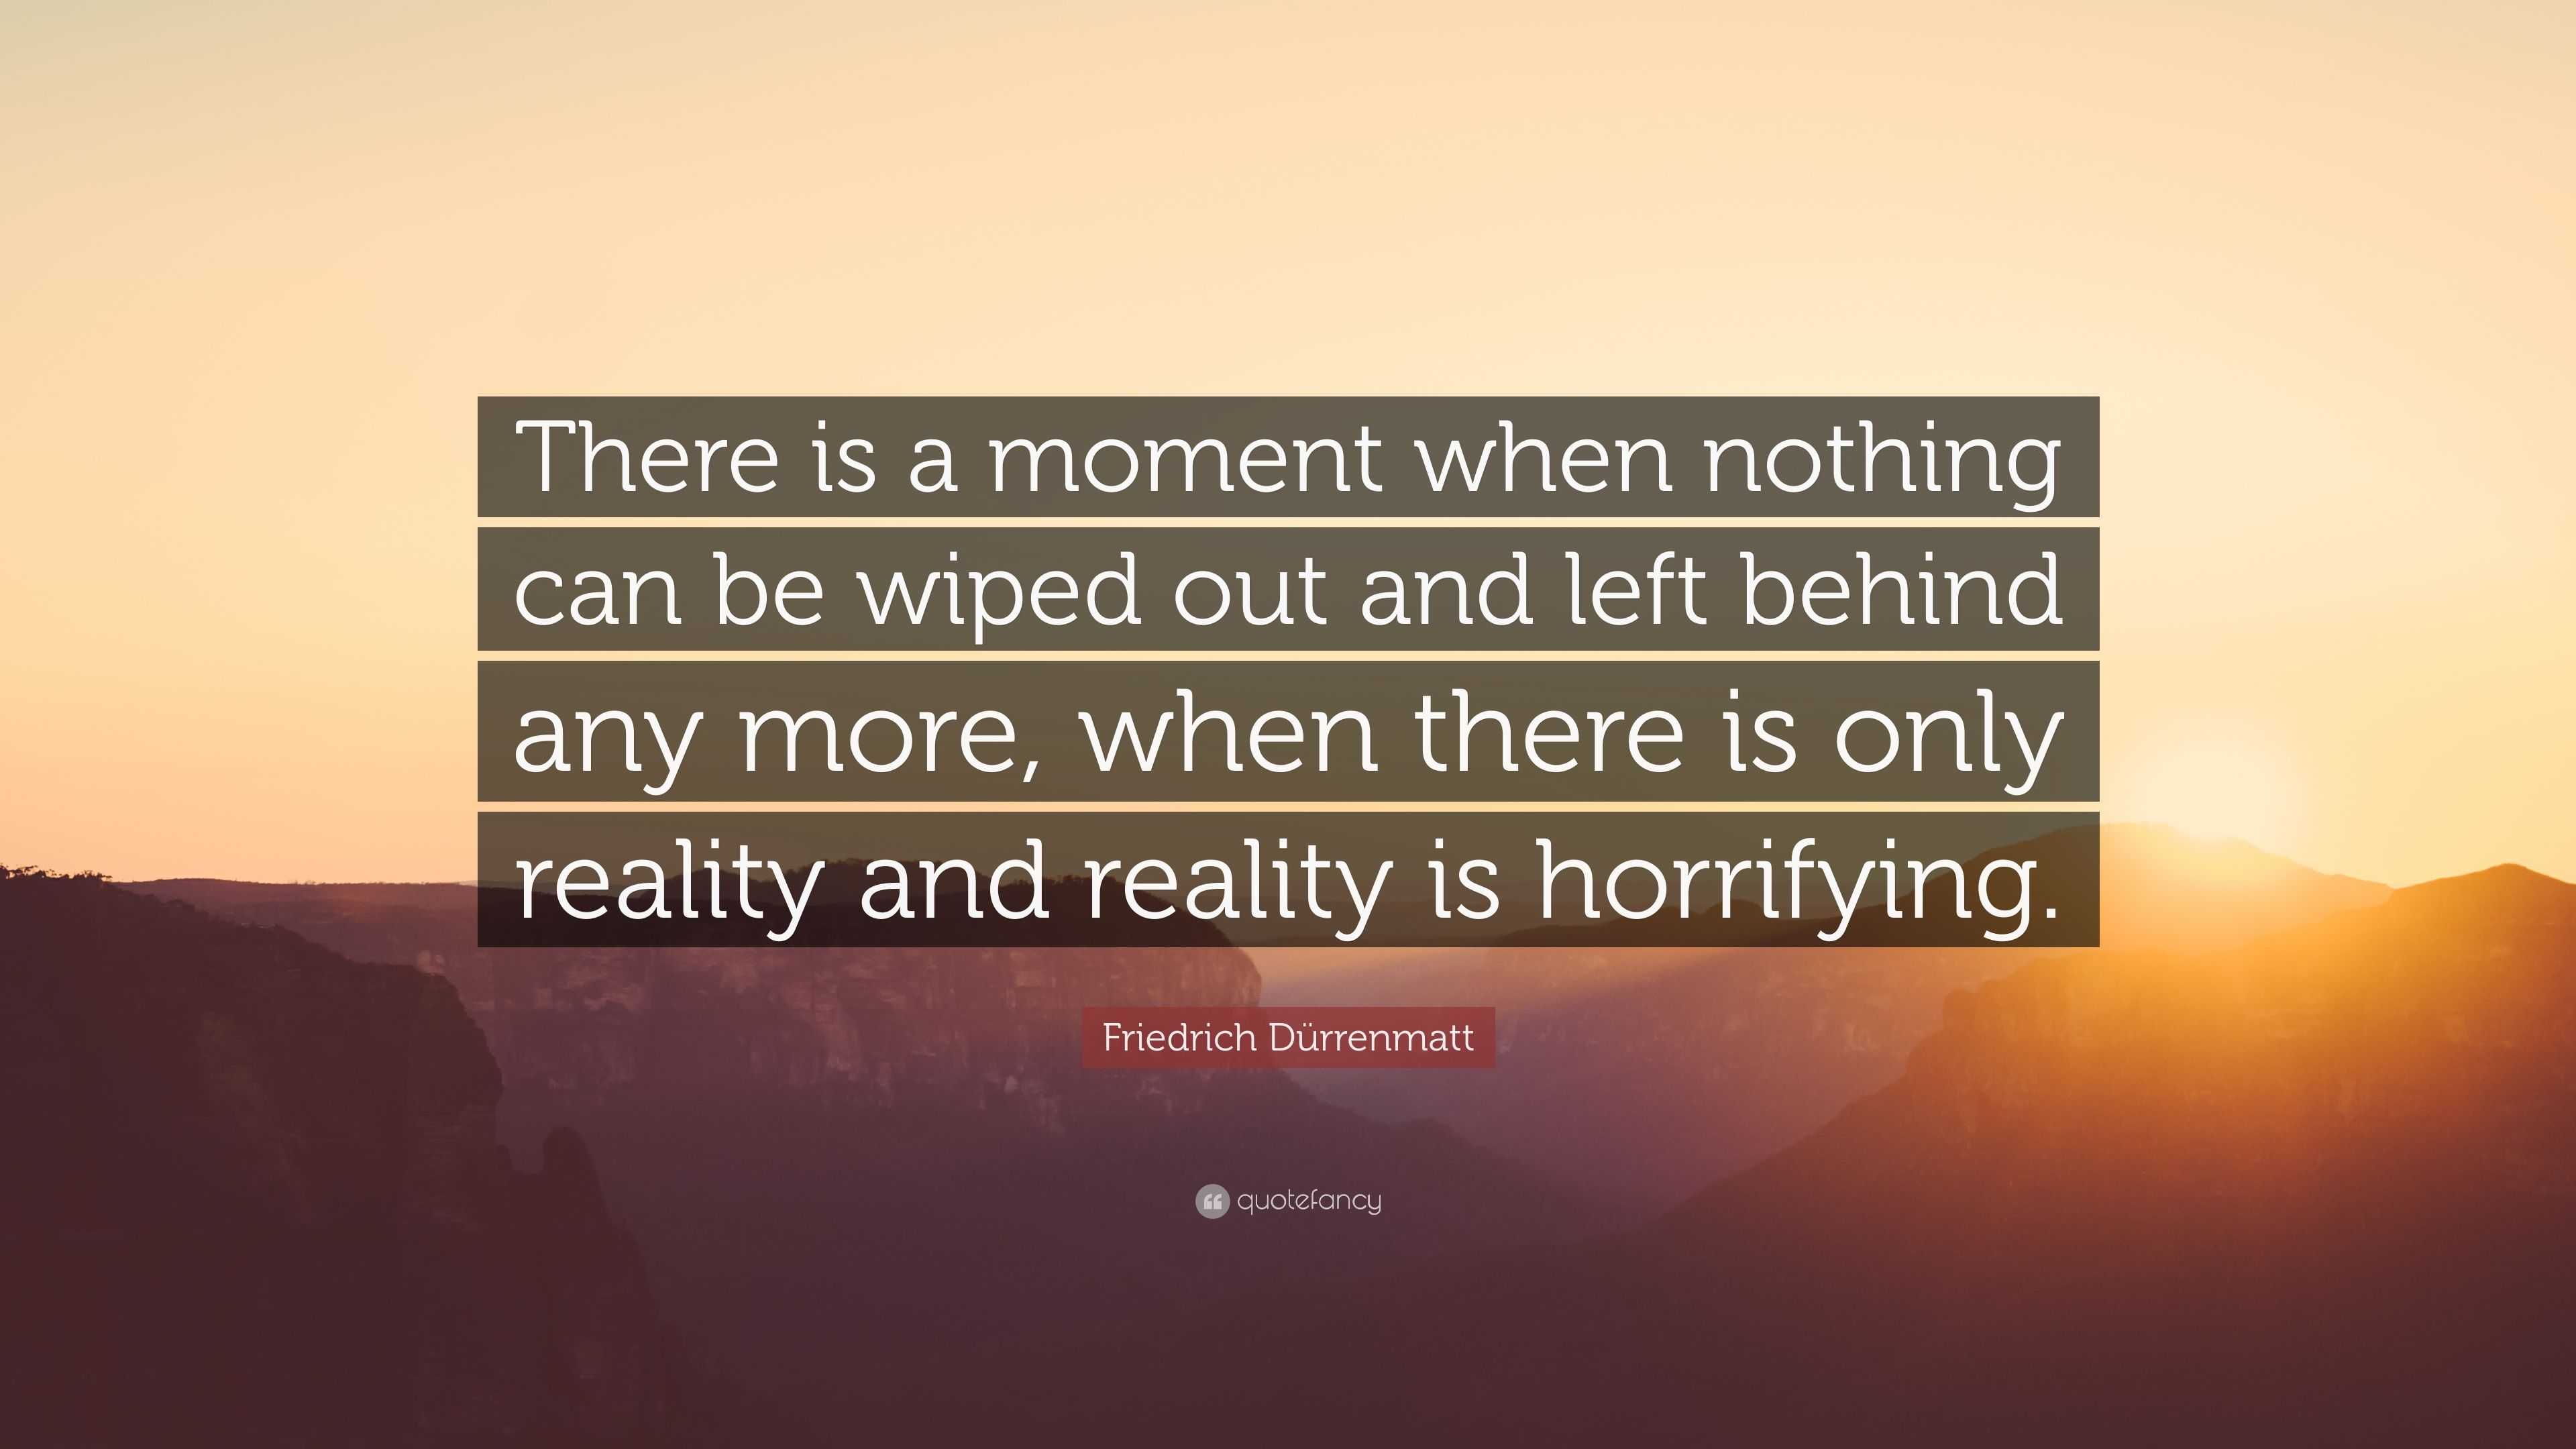 Friedrich Dürrenmatt Quote: “There is a moment when nothing can be ...